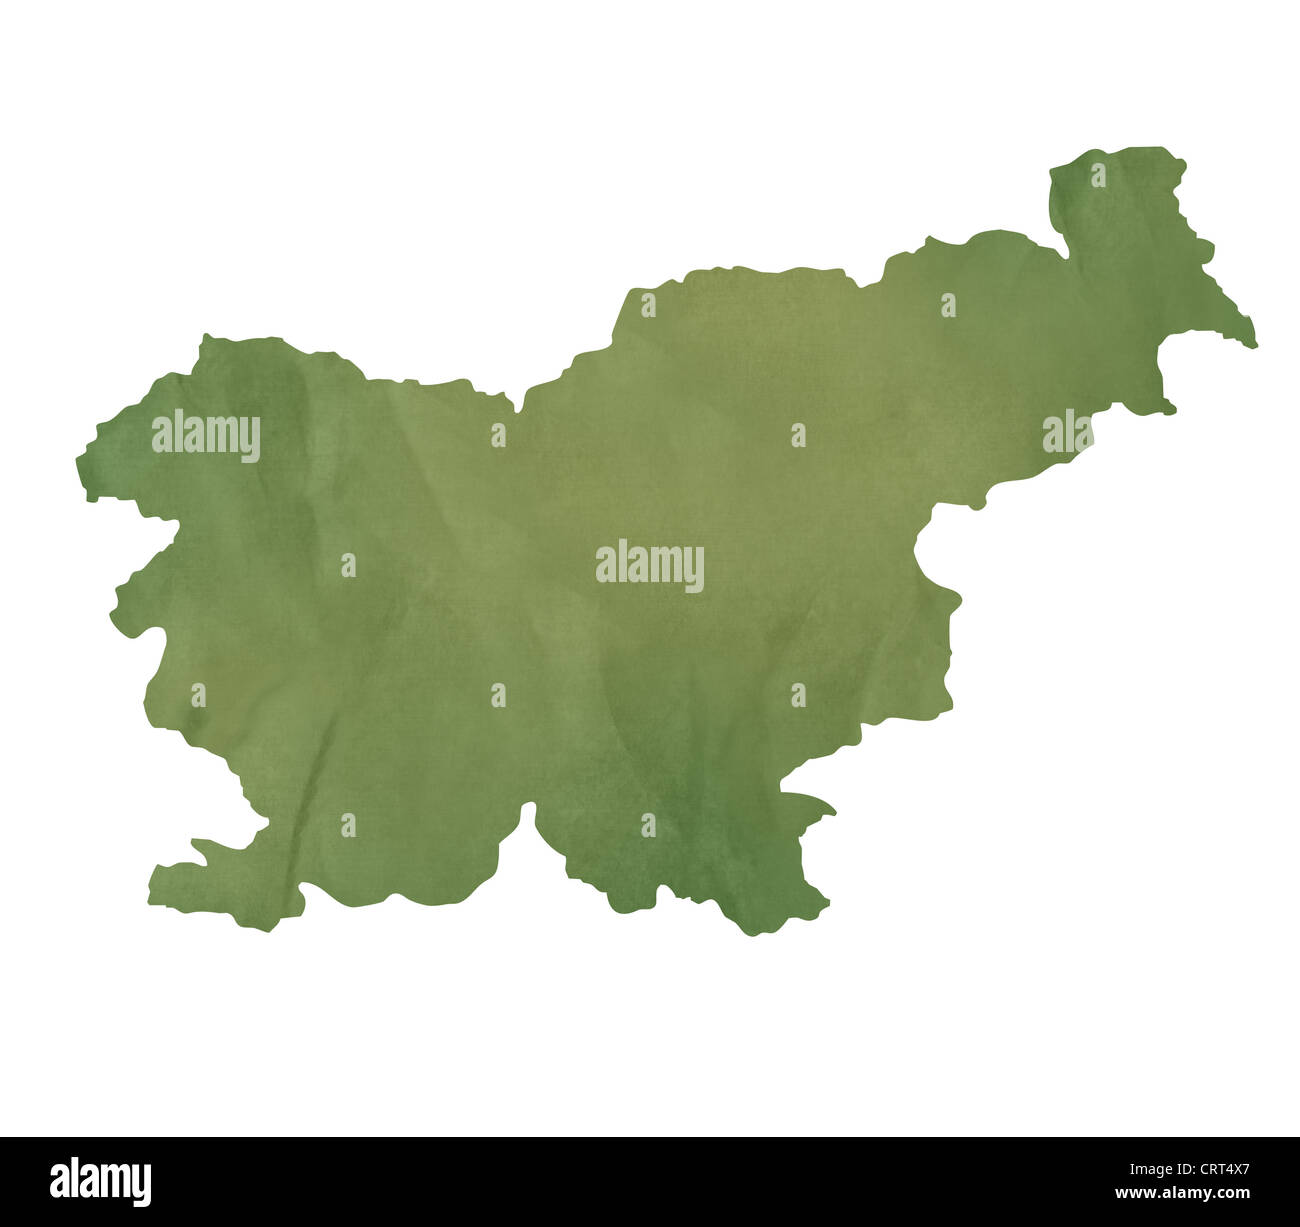 Slovenia map in old green paper isolated on white background. Stock Photo